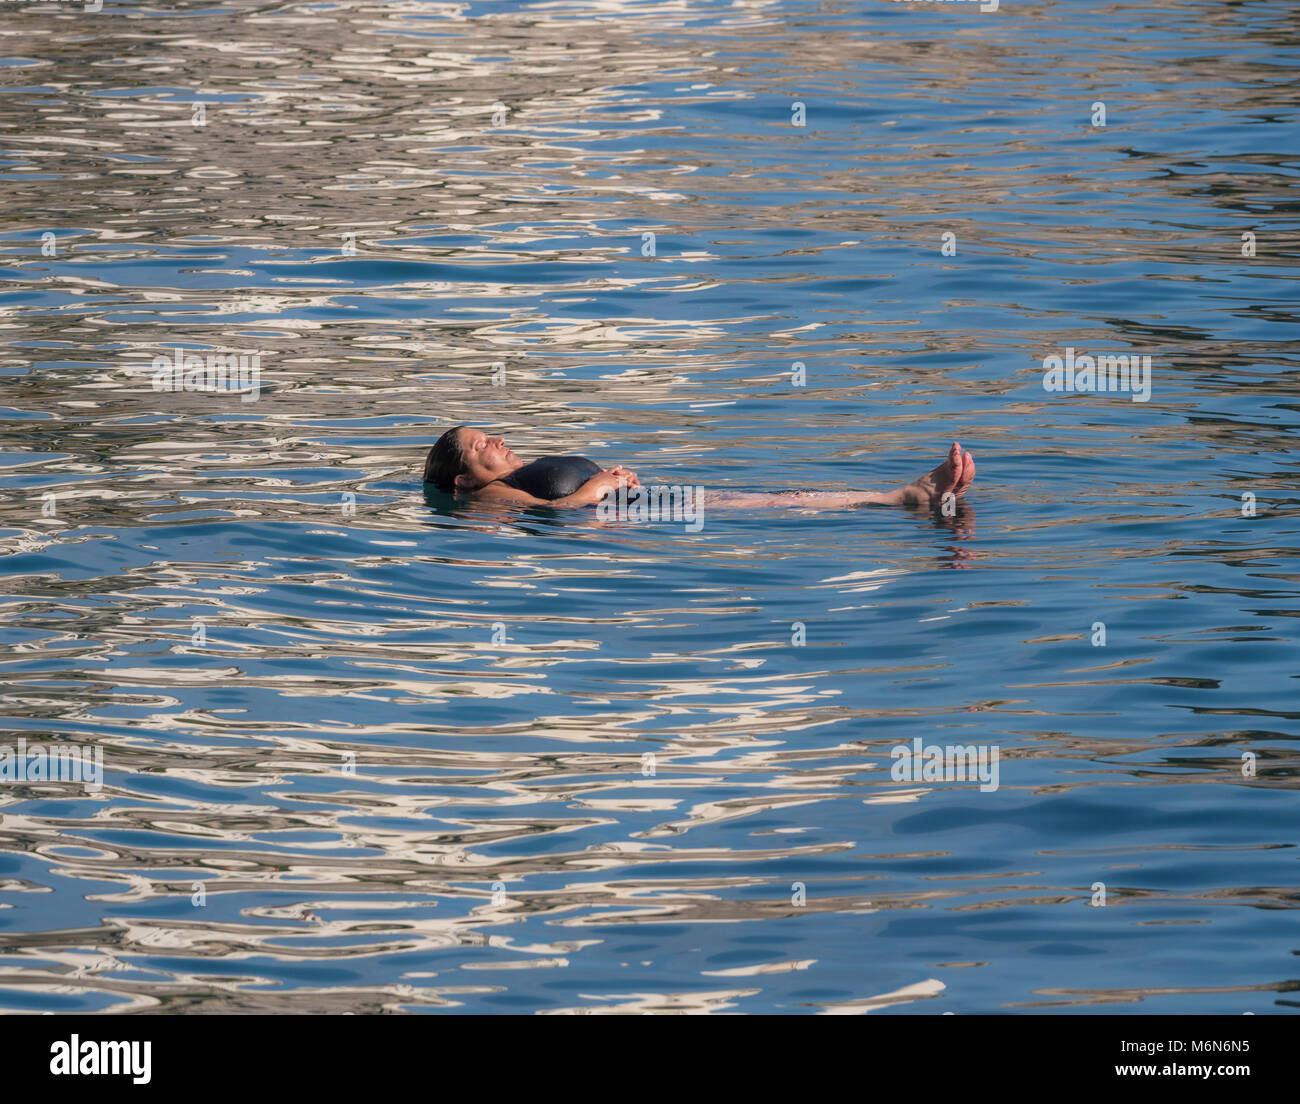 Caucasian woman floating on her back in the Tyrrhenian sea, eyes closed, relaxing on a hot sunny day. Stock Photo